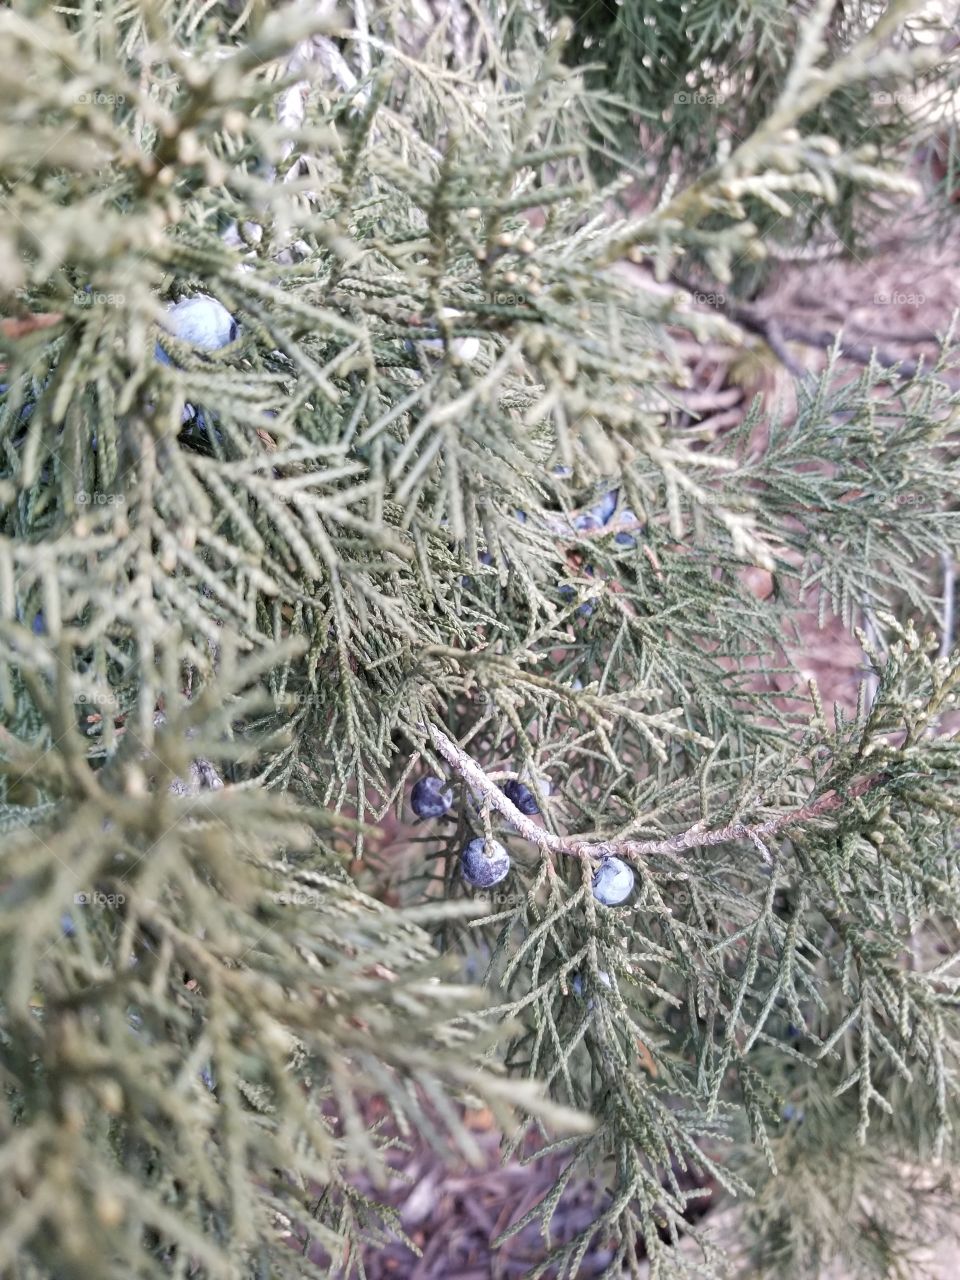 Some Type of Blue Berries on an Evergreen